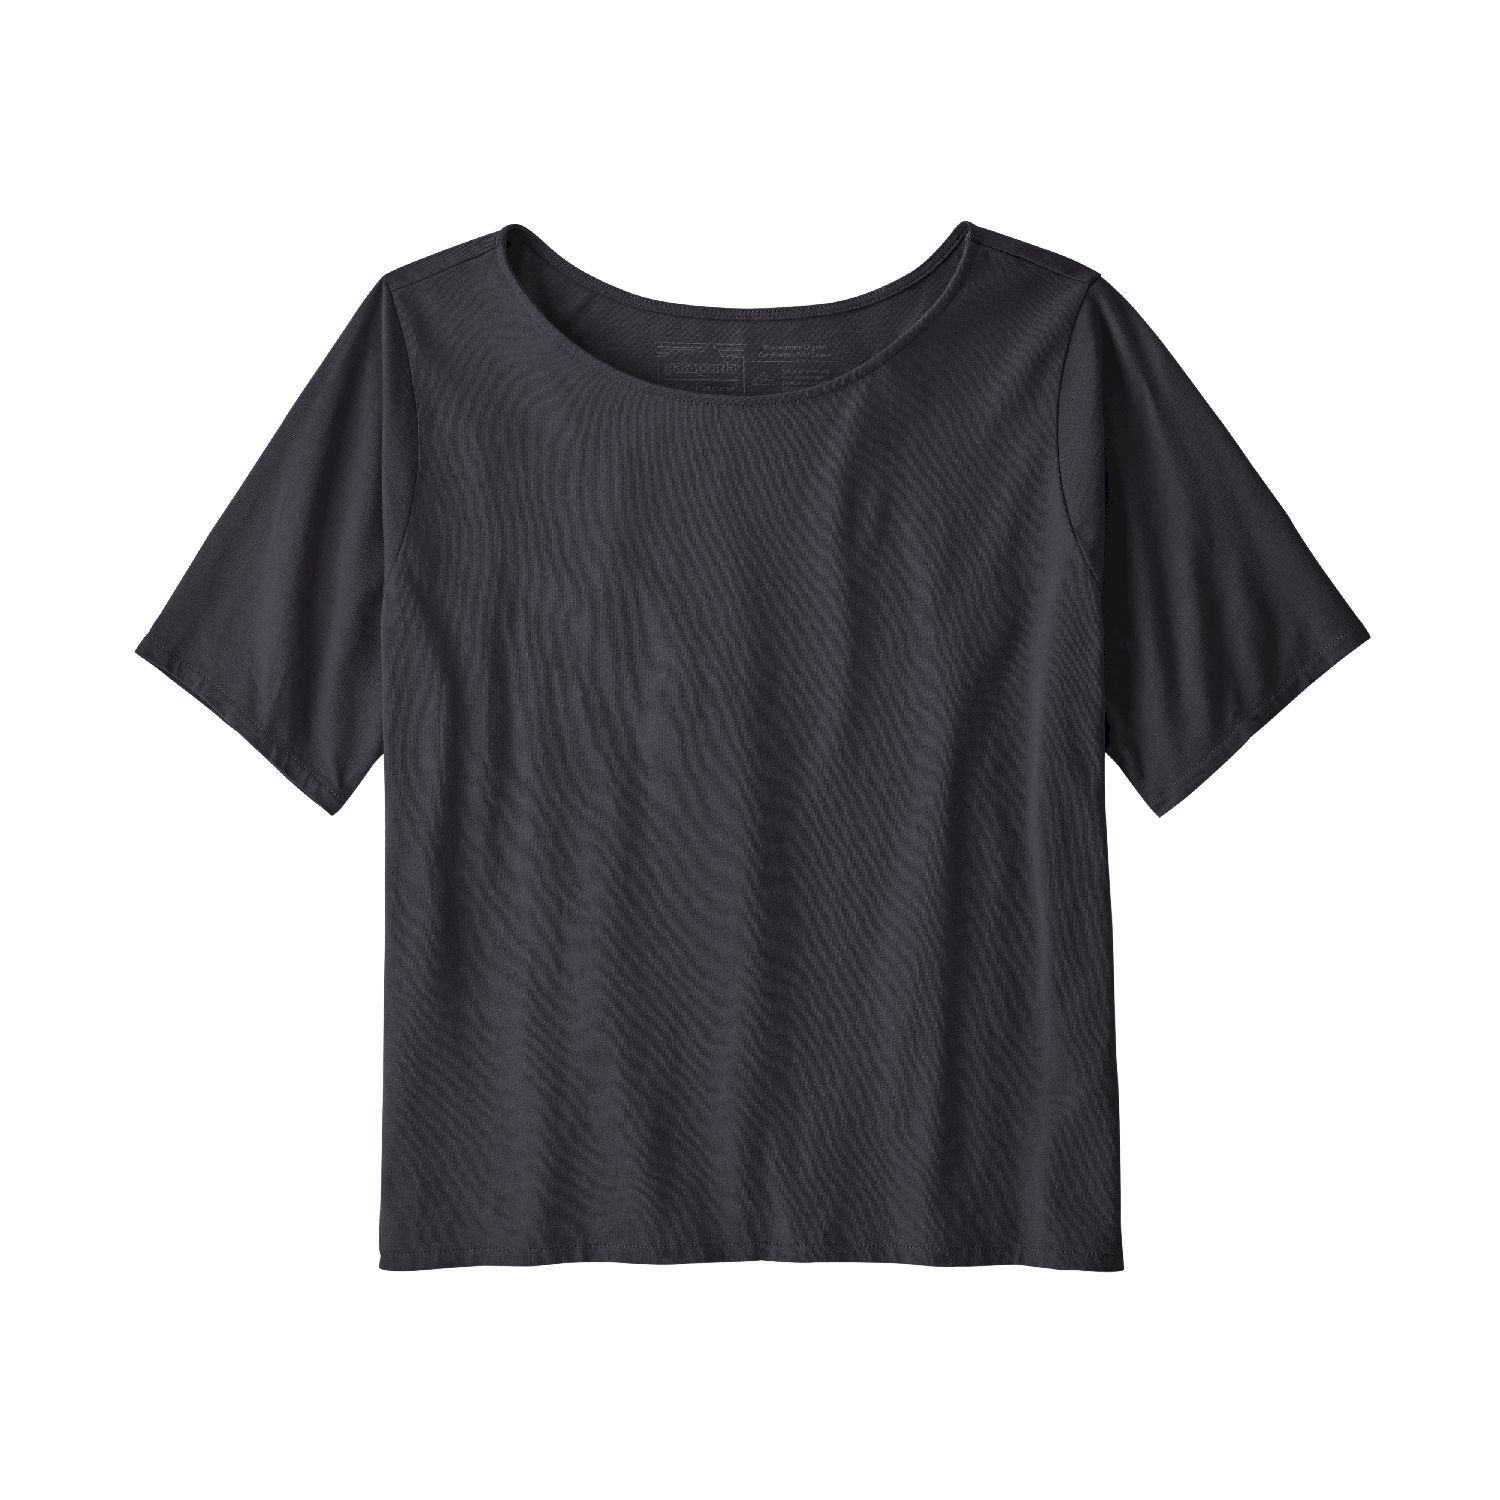 Patagonia Cotton in Conversion Tee - T-shirt - Women's